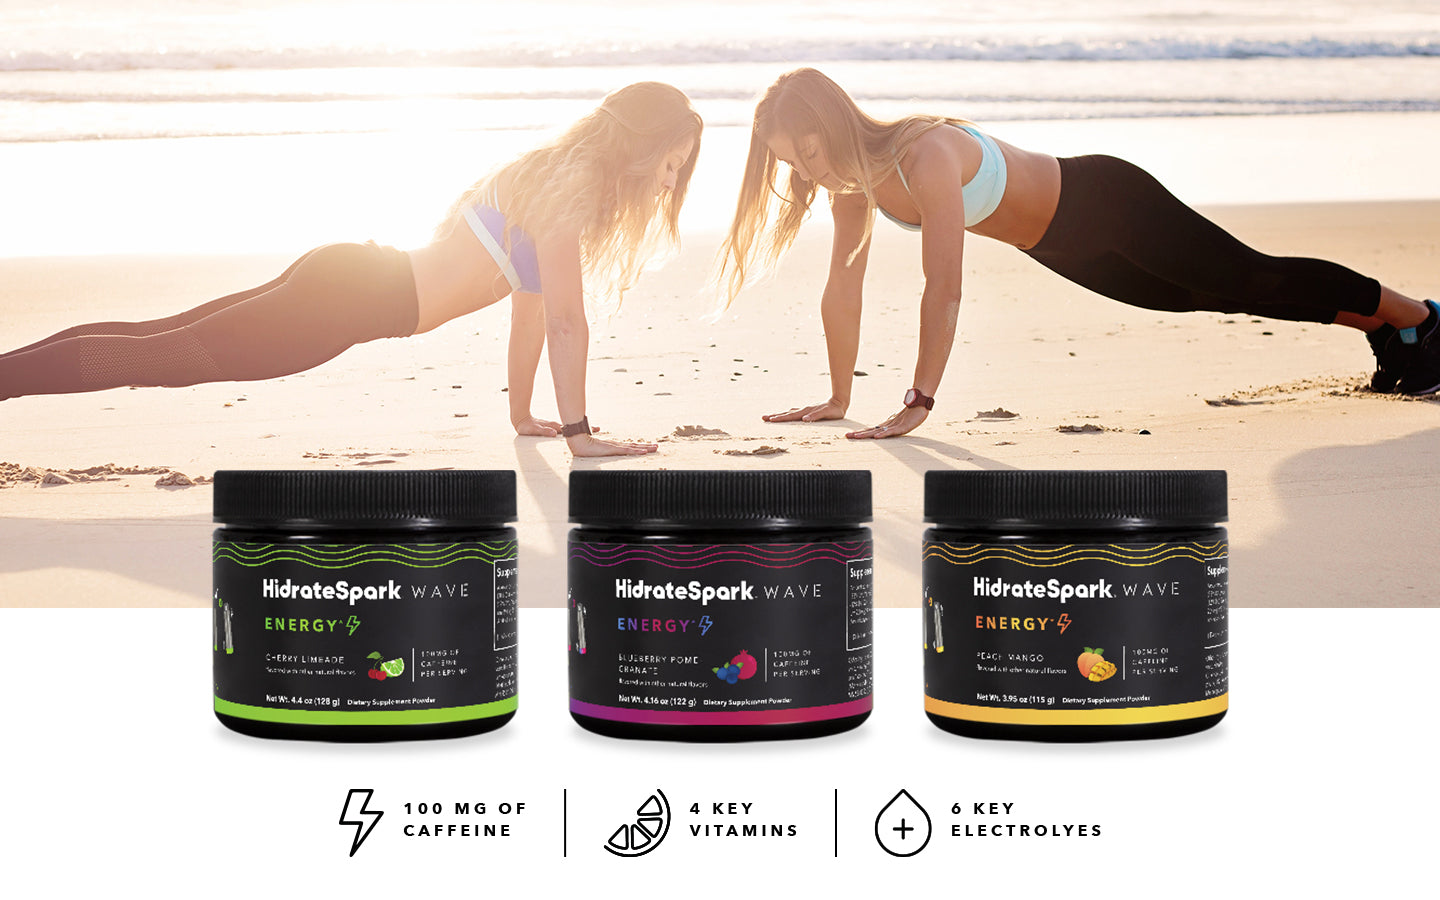 Get a Boost of Energy When You Hydrate: NEW HidrateSpark WAVE Energy